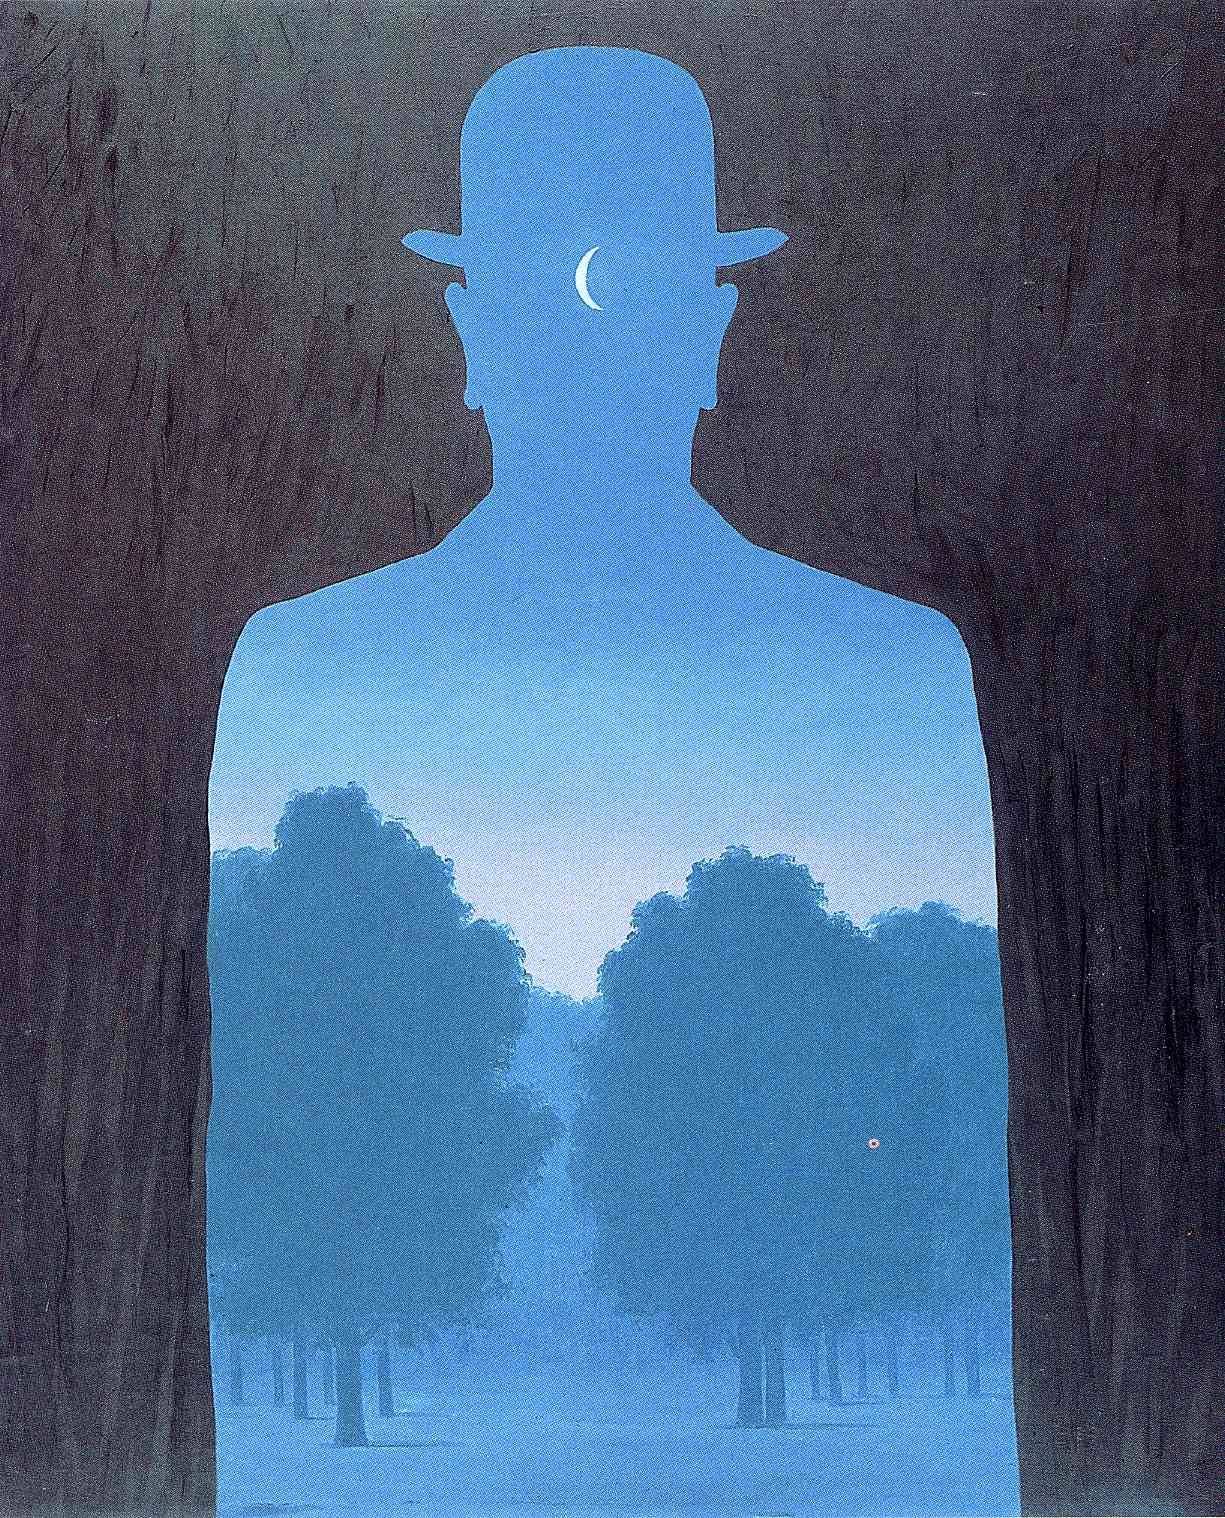 A Friend of Order by Rene Magritte